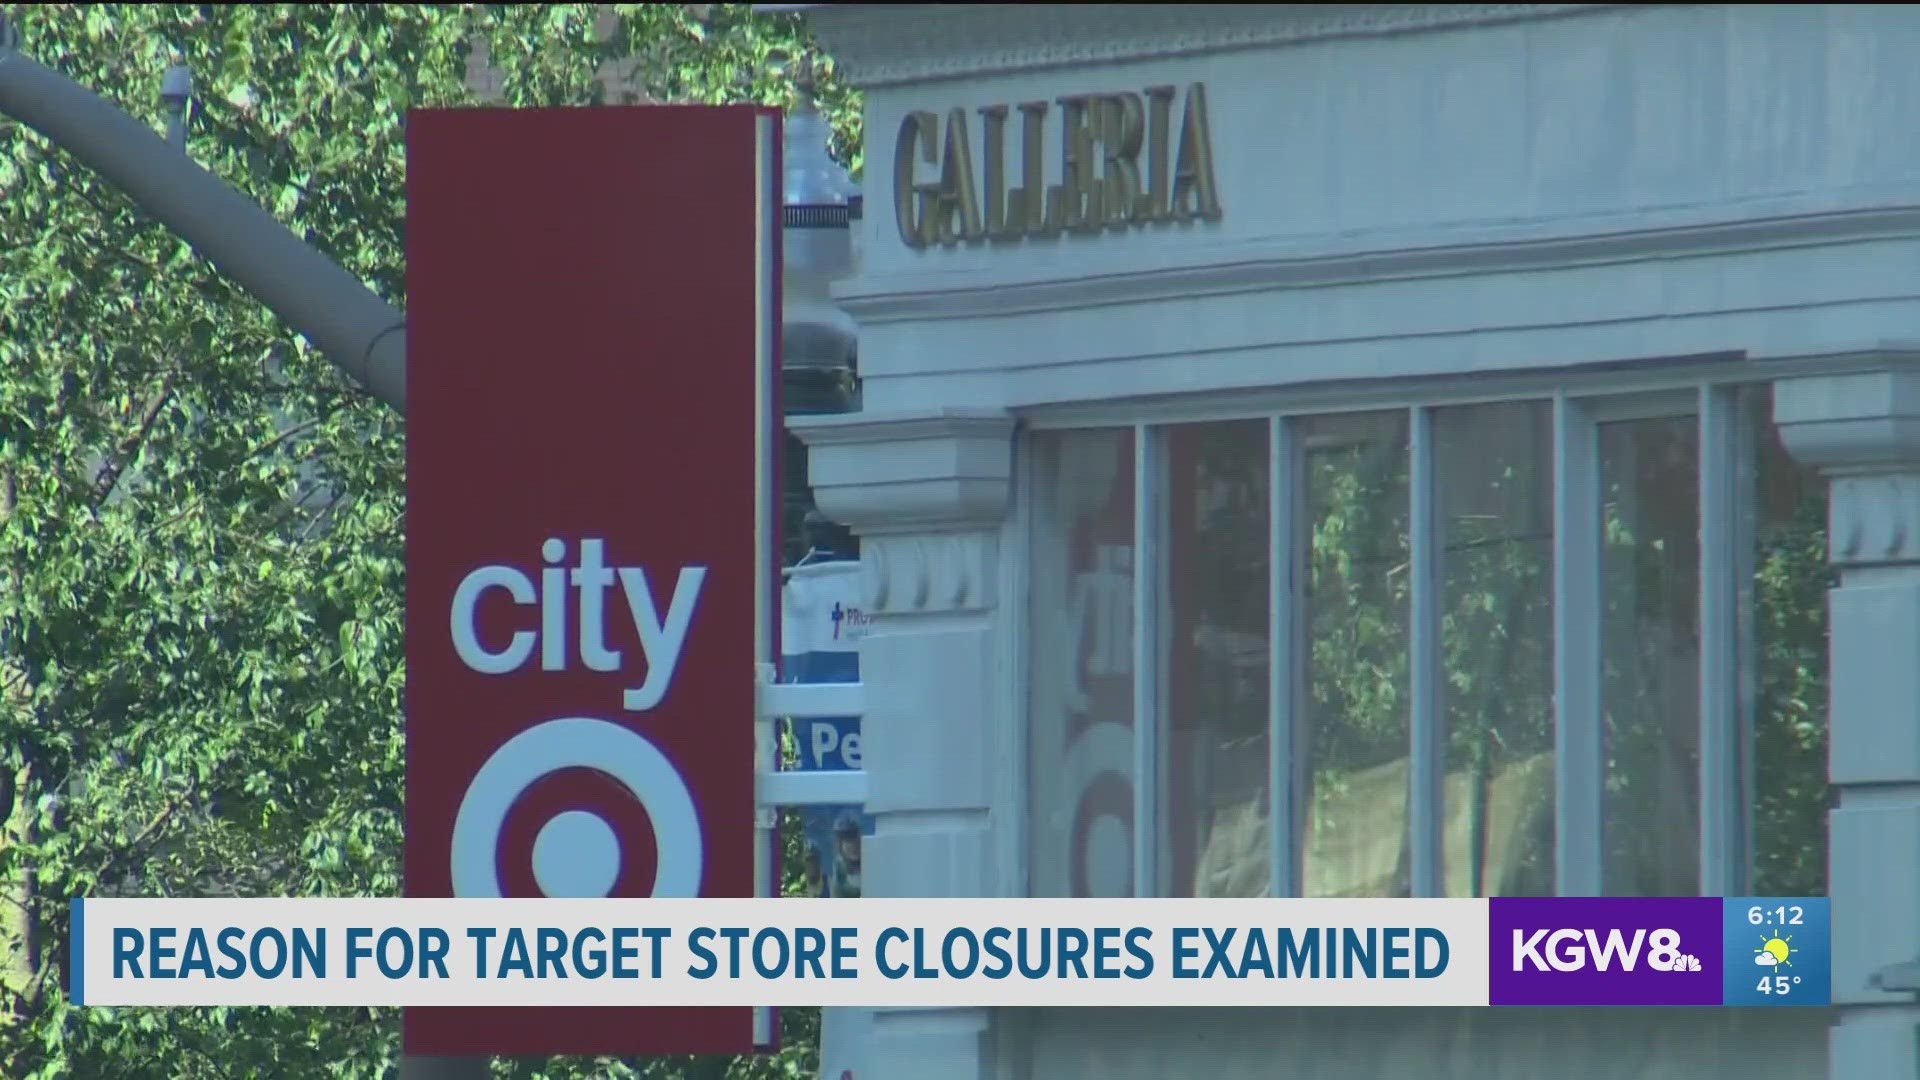 An investigation found that theft was lower at the three closed Targets than its other stores in the area, despite the company saying otherwise.